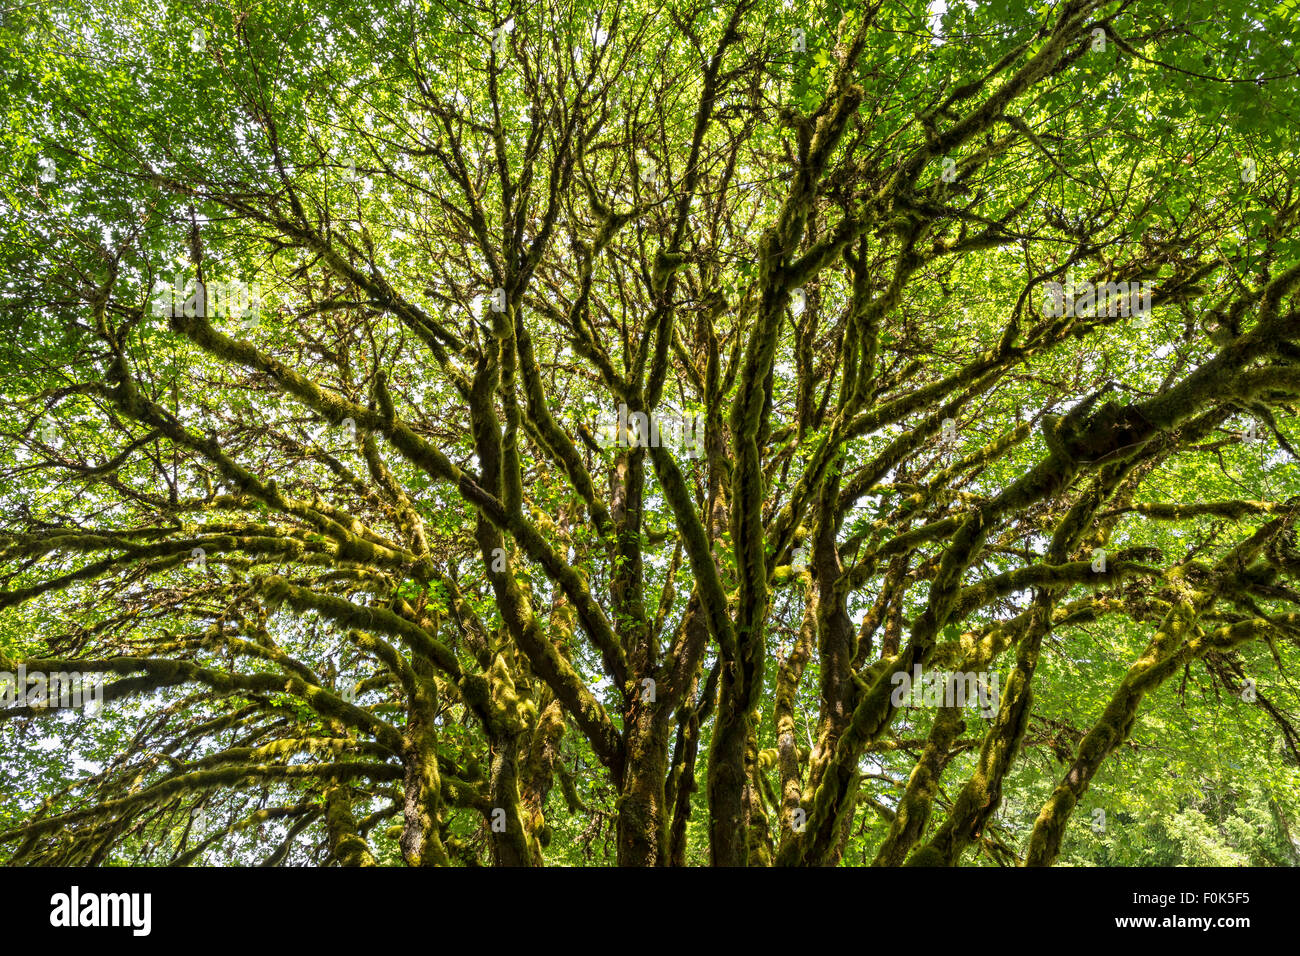 A sunlit bigleaf maple tree covered with epiphytic moss near Lake Crescent in Olympic National Park, Washington Stock Photo